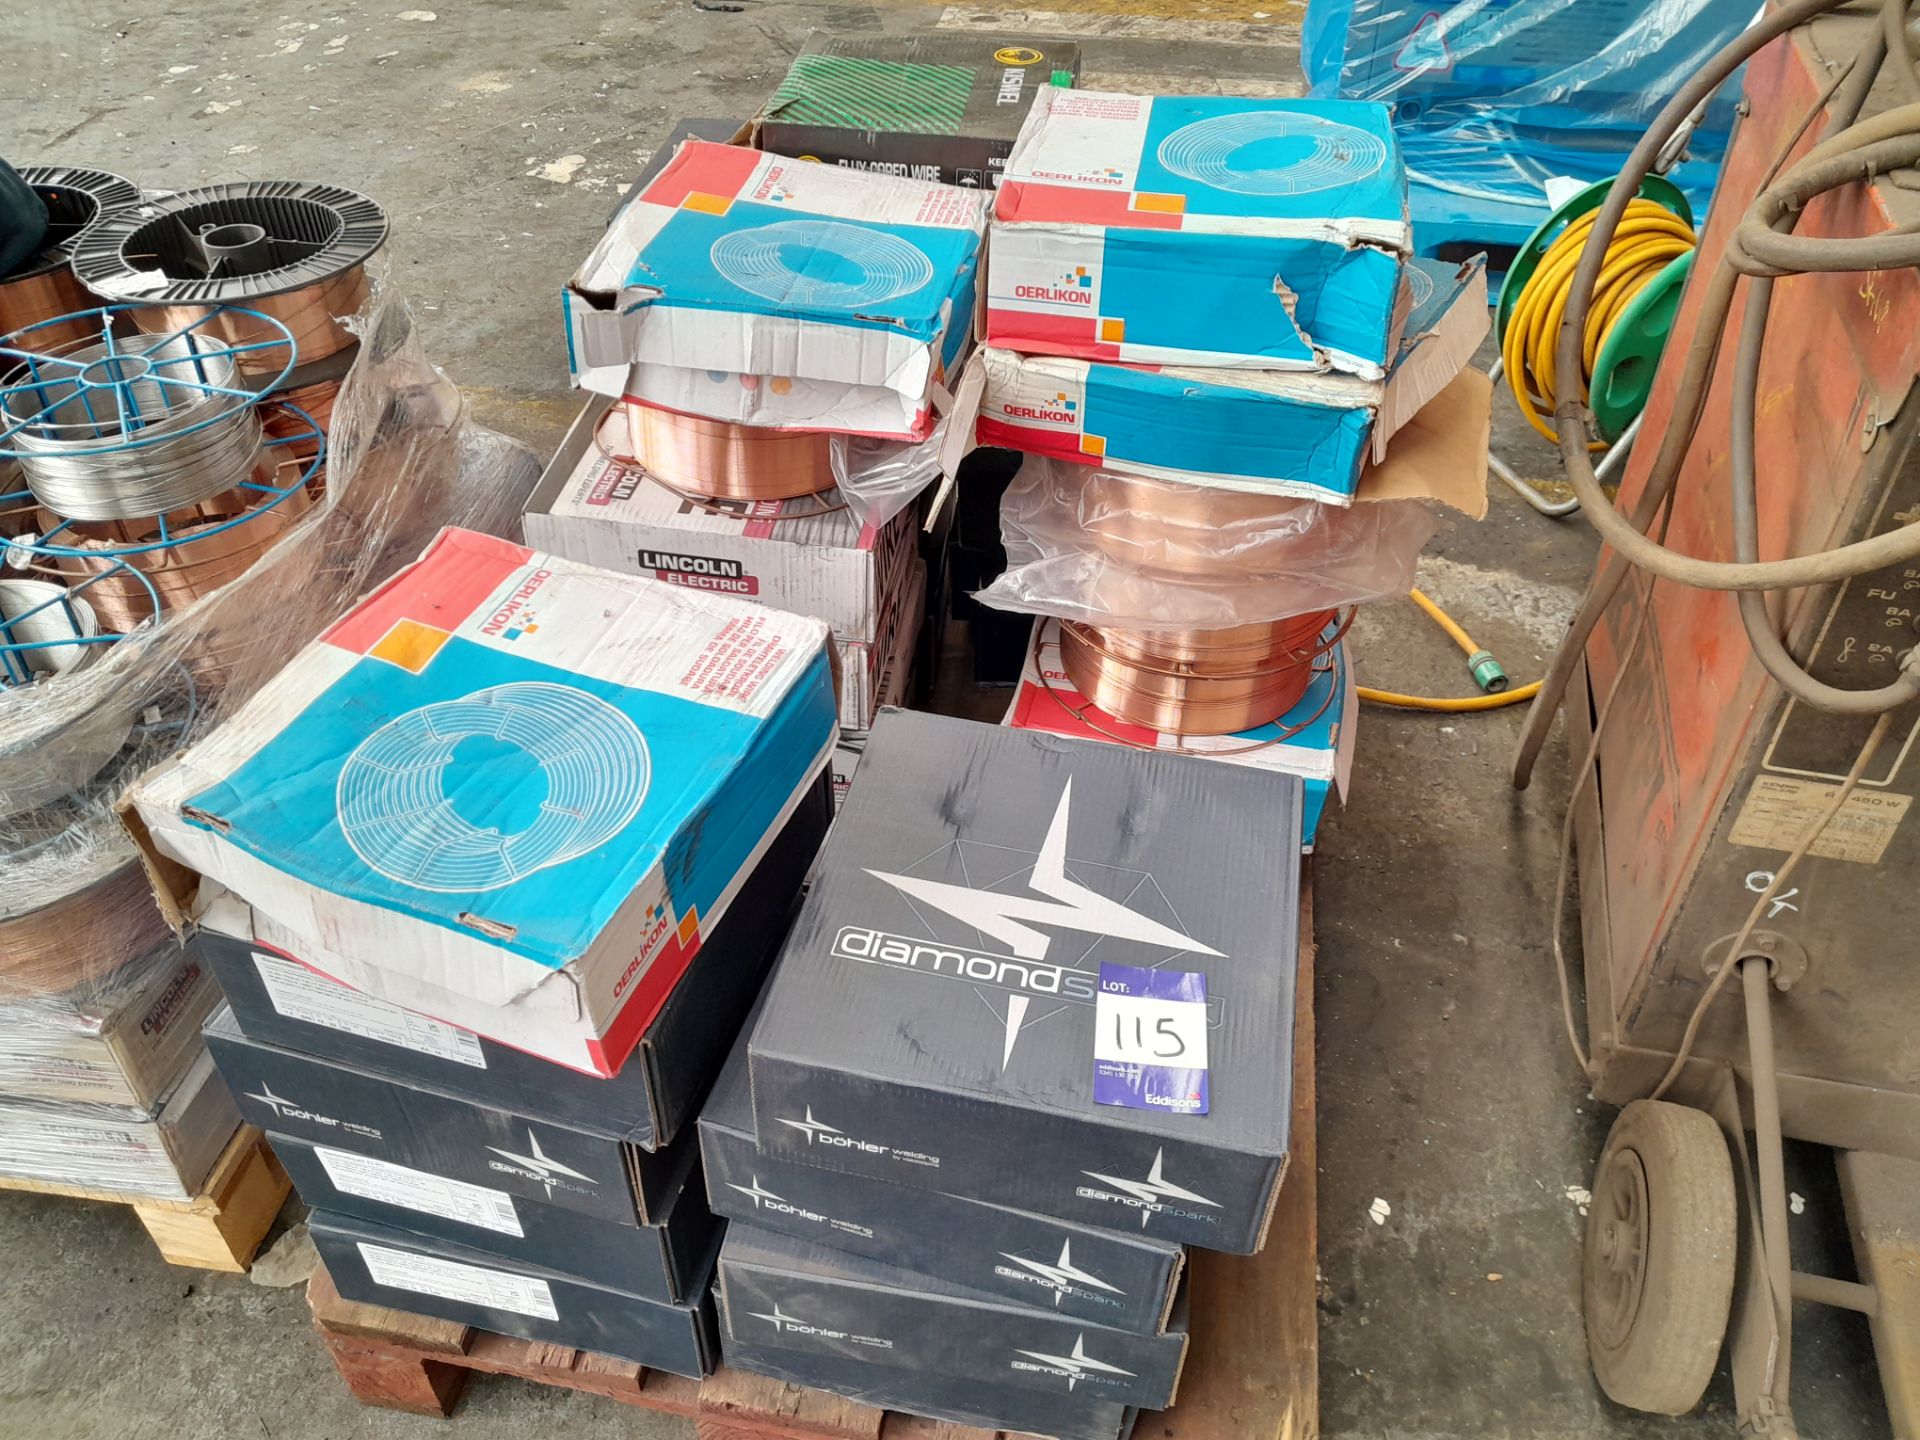 Large quantity of assorted welding wire to pallet